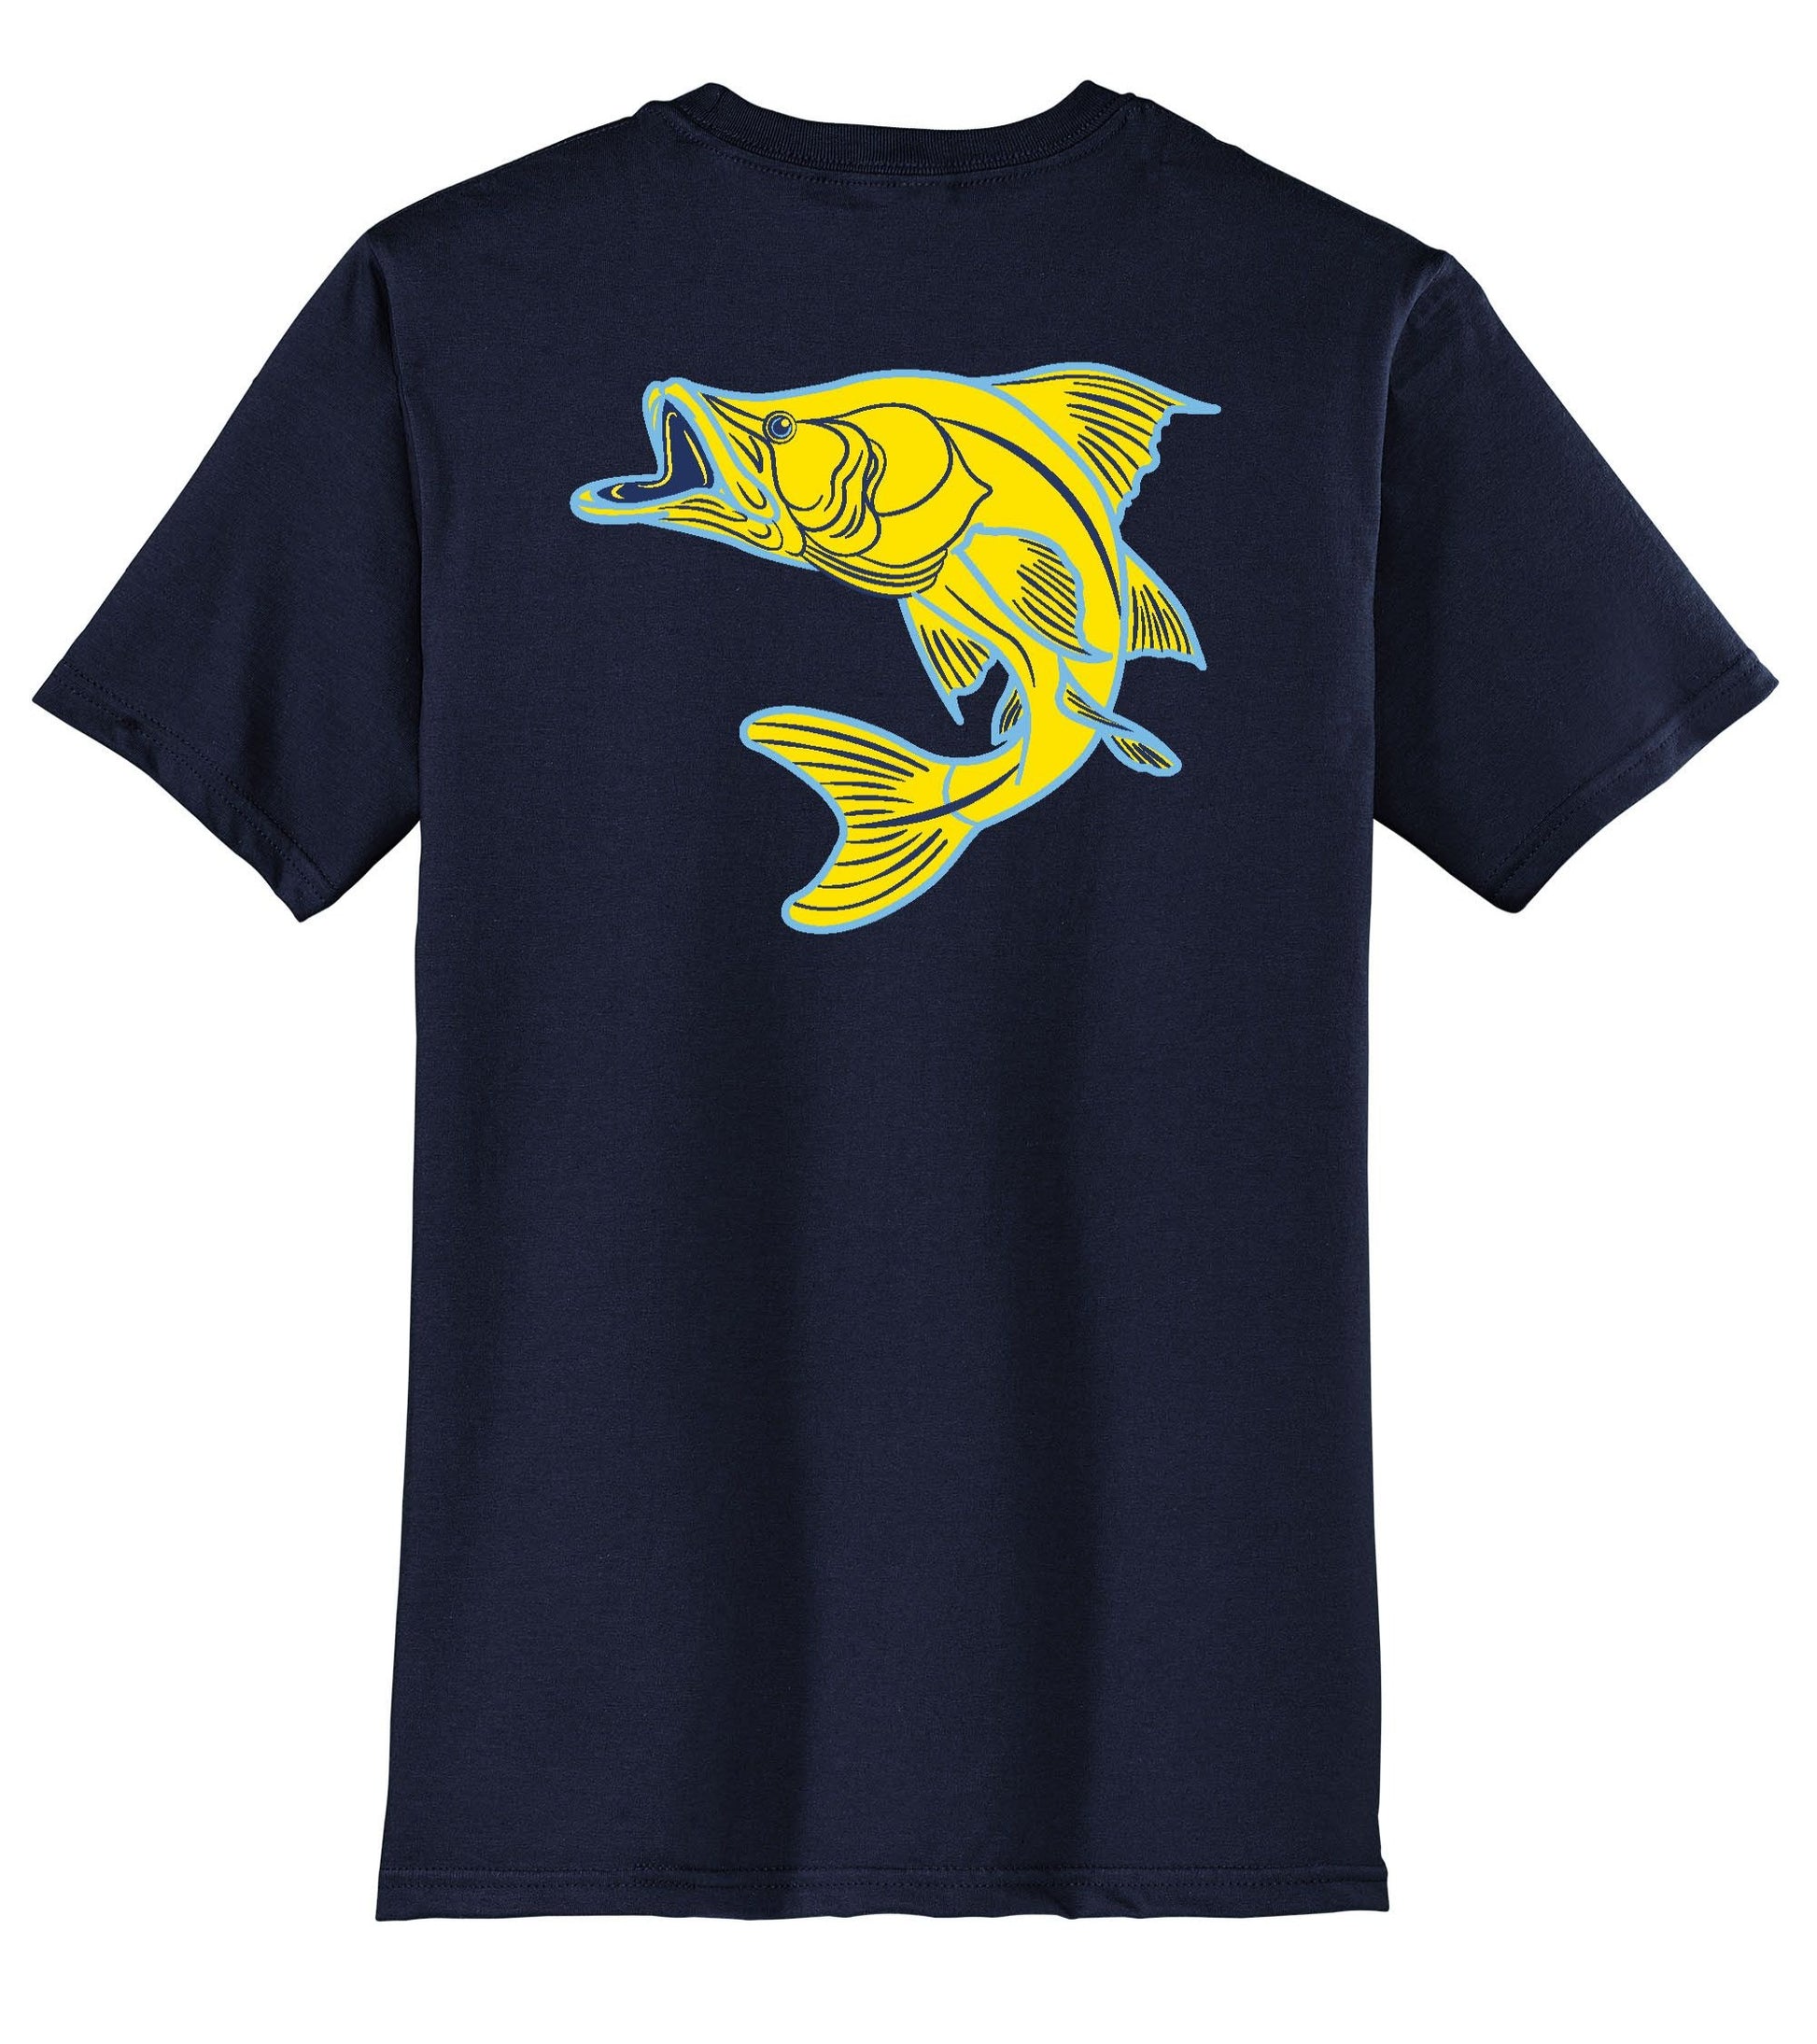 New! Navy Snook Fishing Cotton T-shirt short sleeves by Reel Fishy Apparel